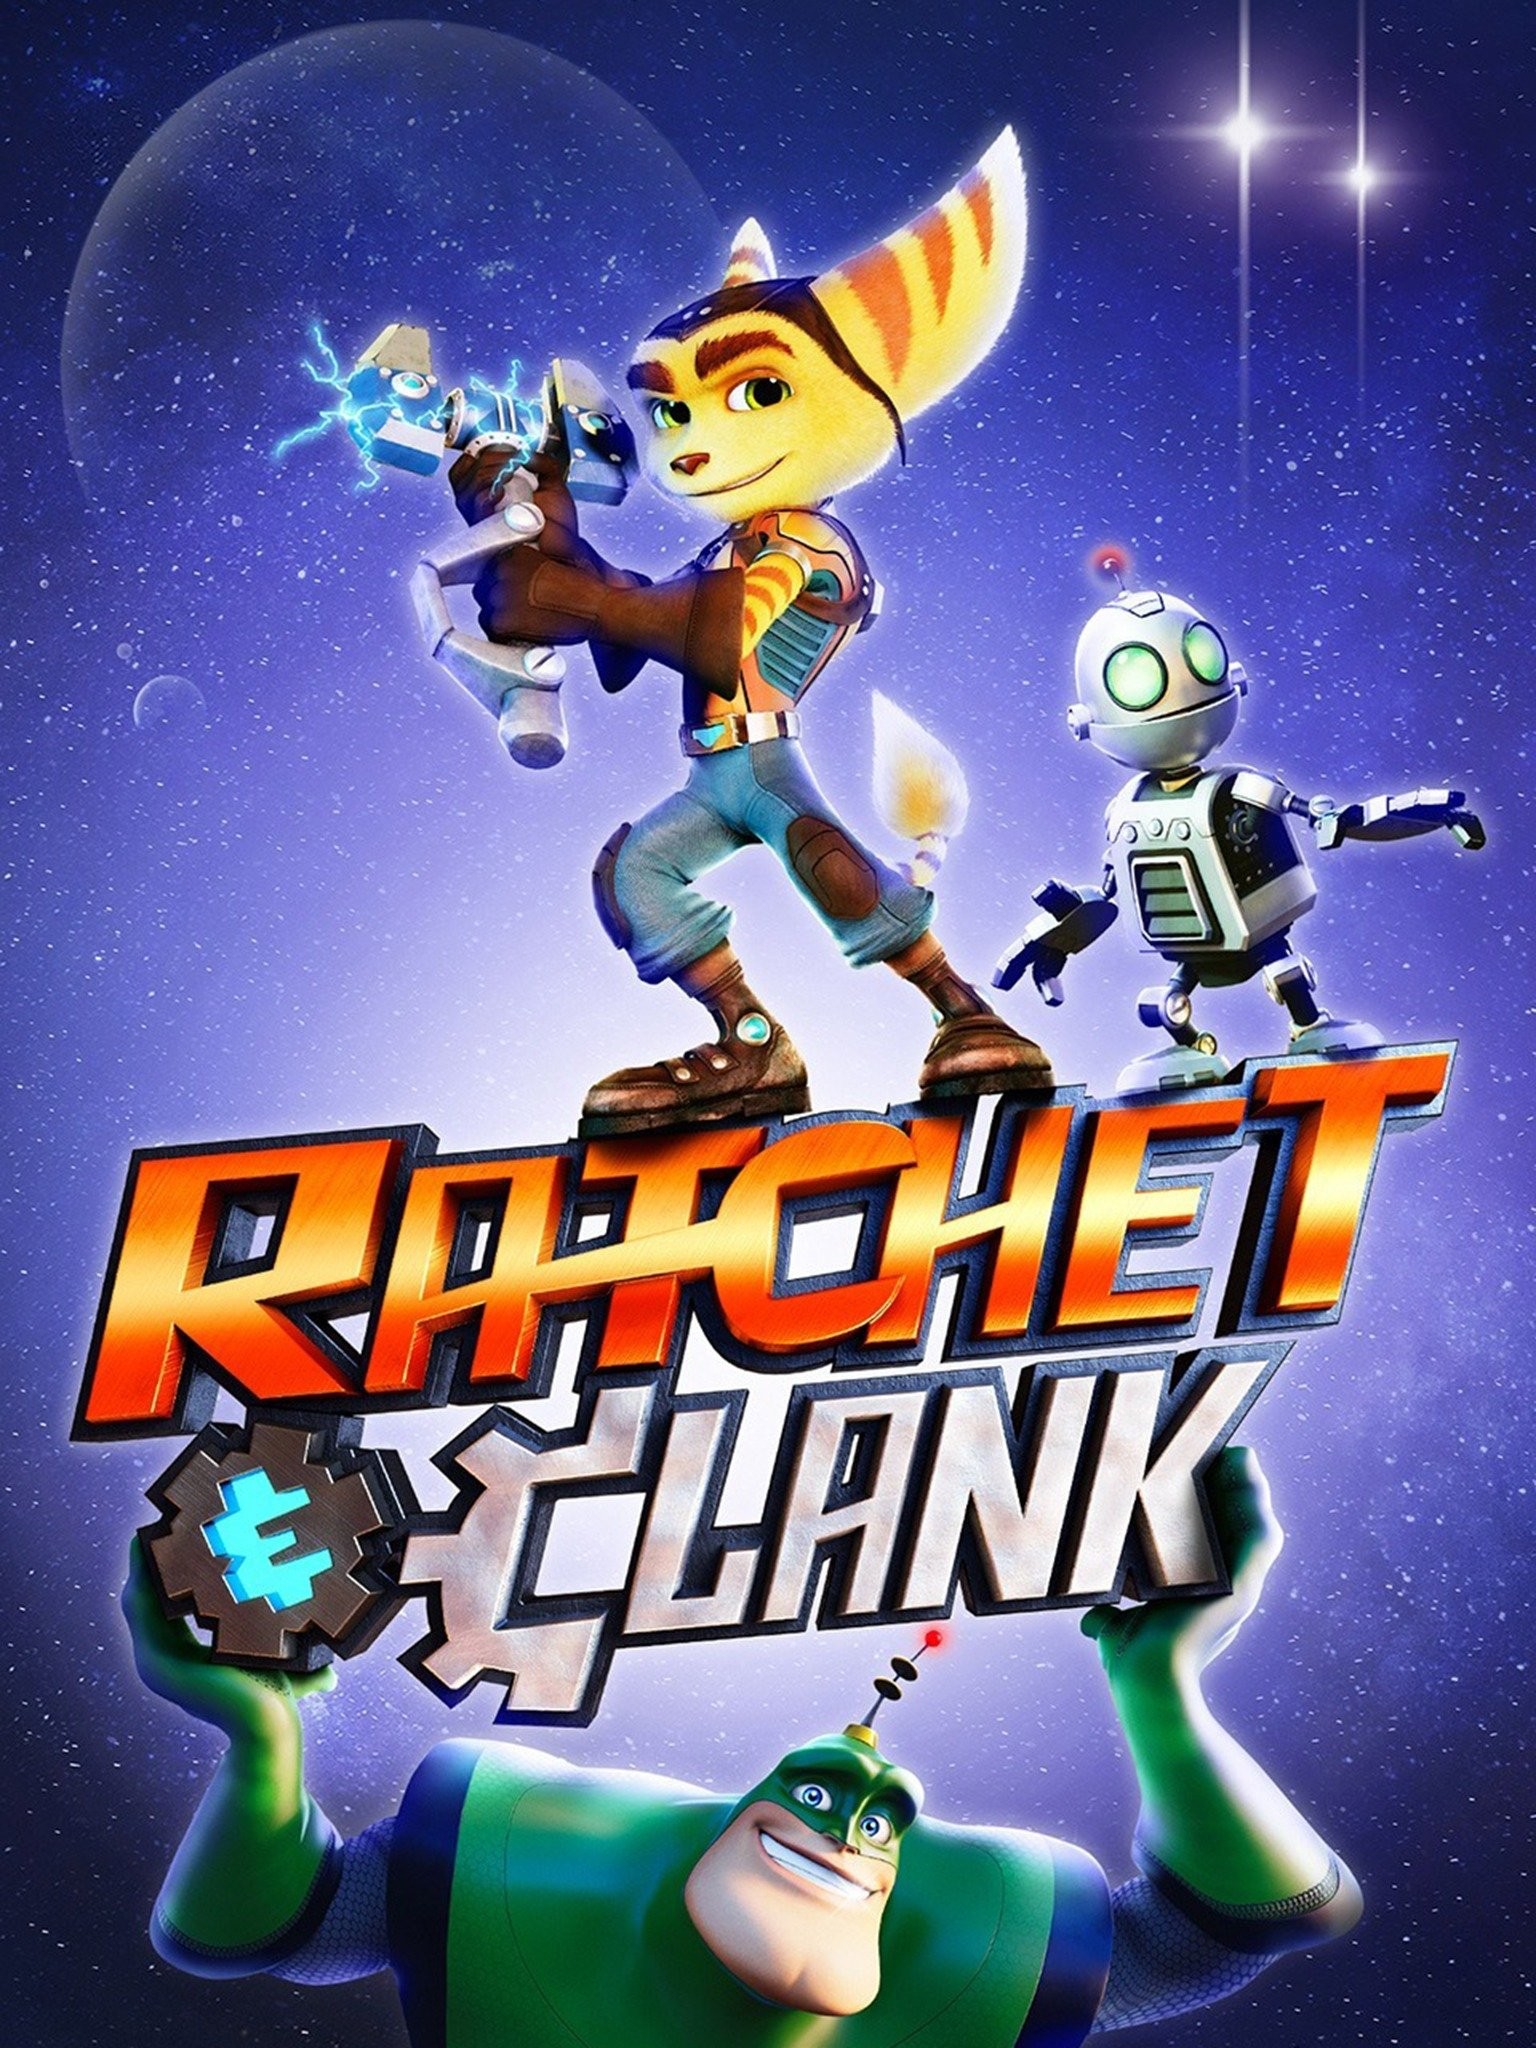 I've played almost every Ratchet and Clank game but never had a